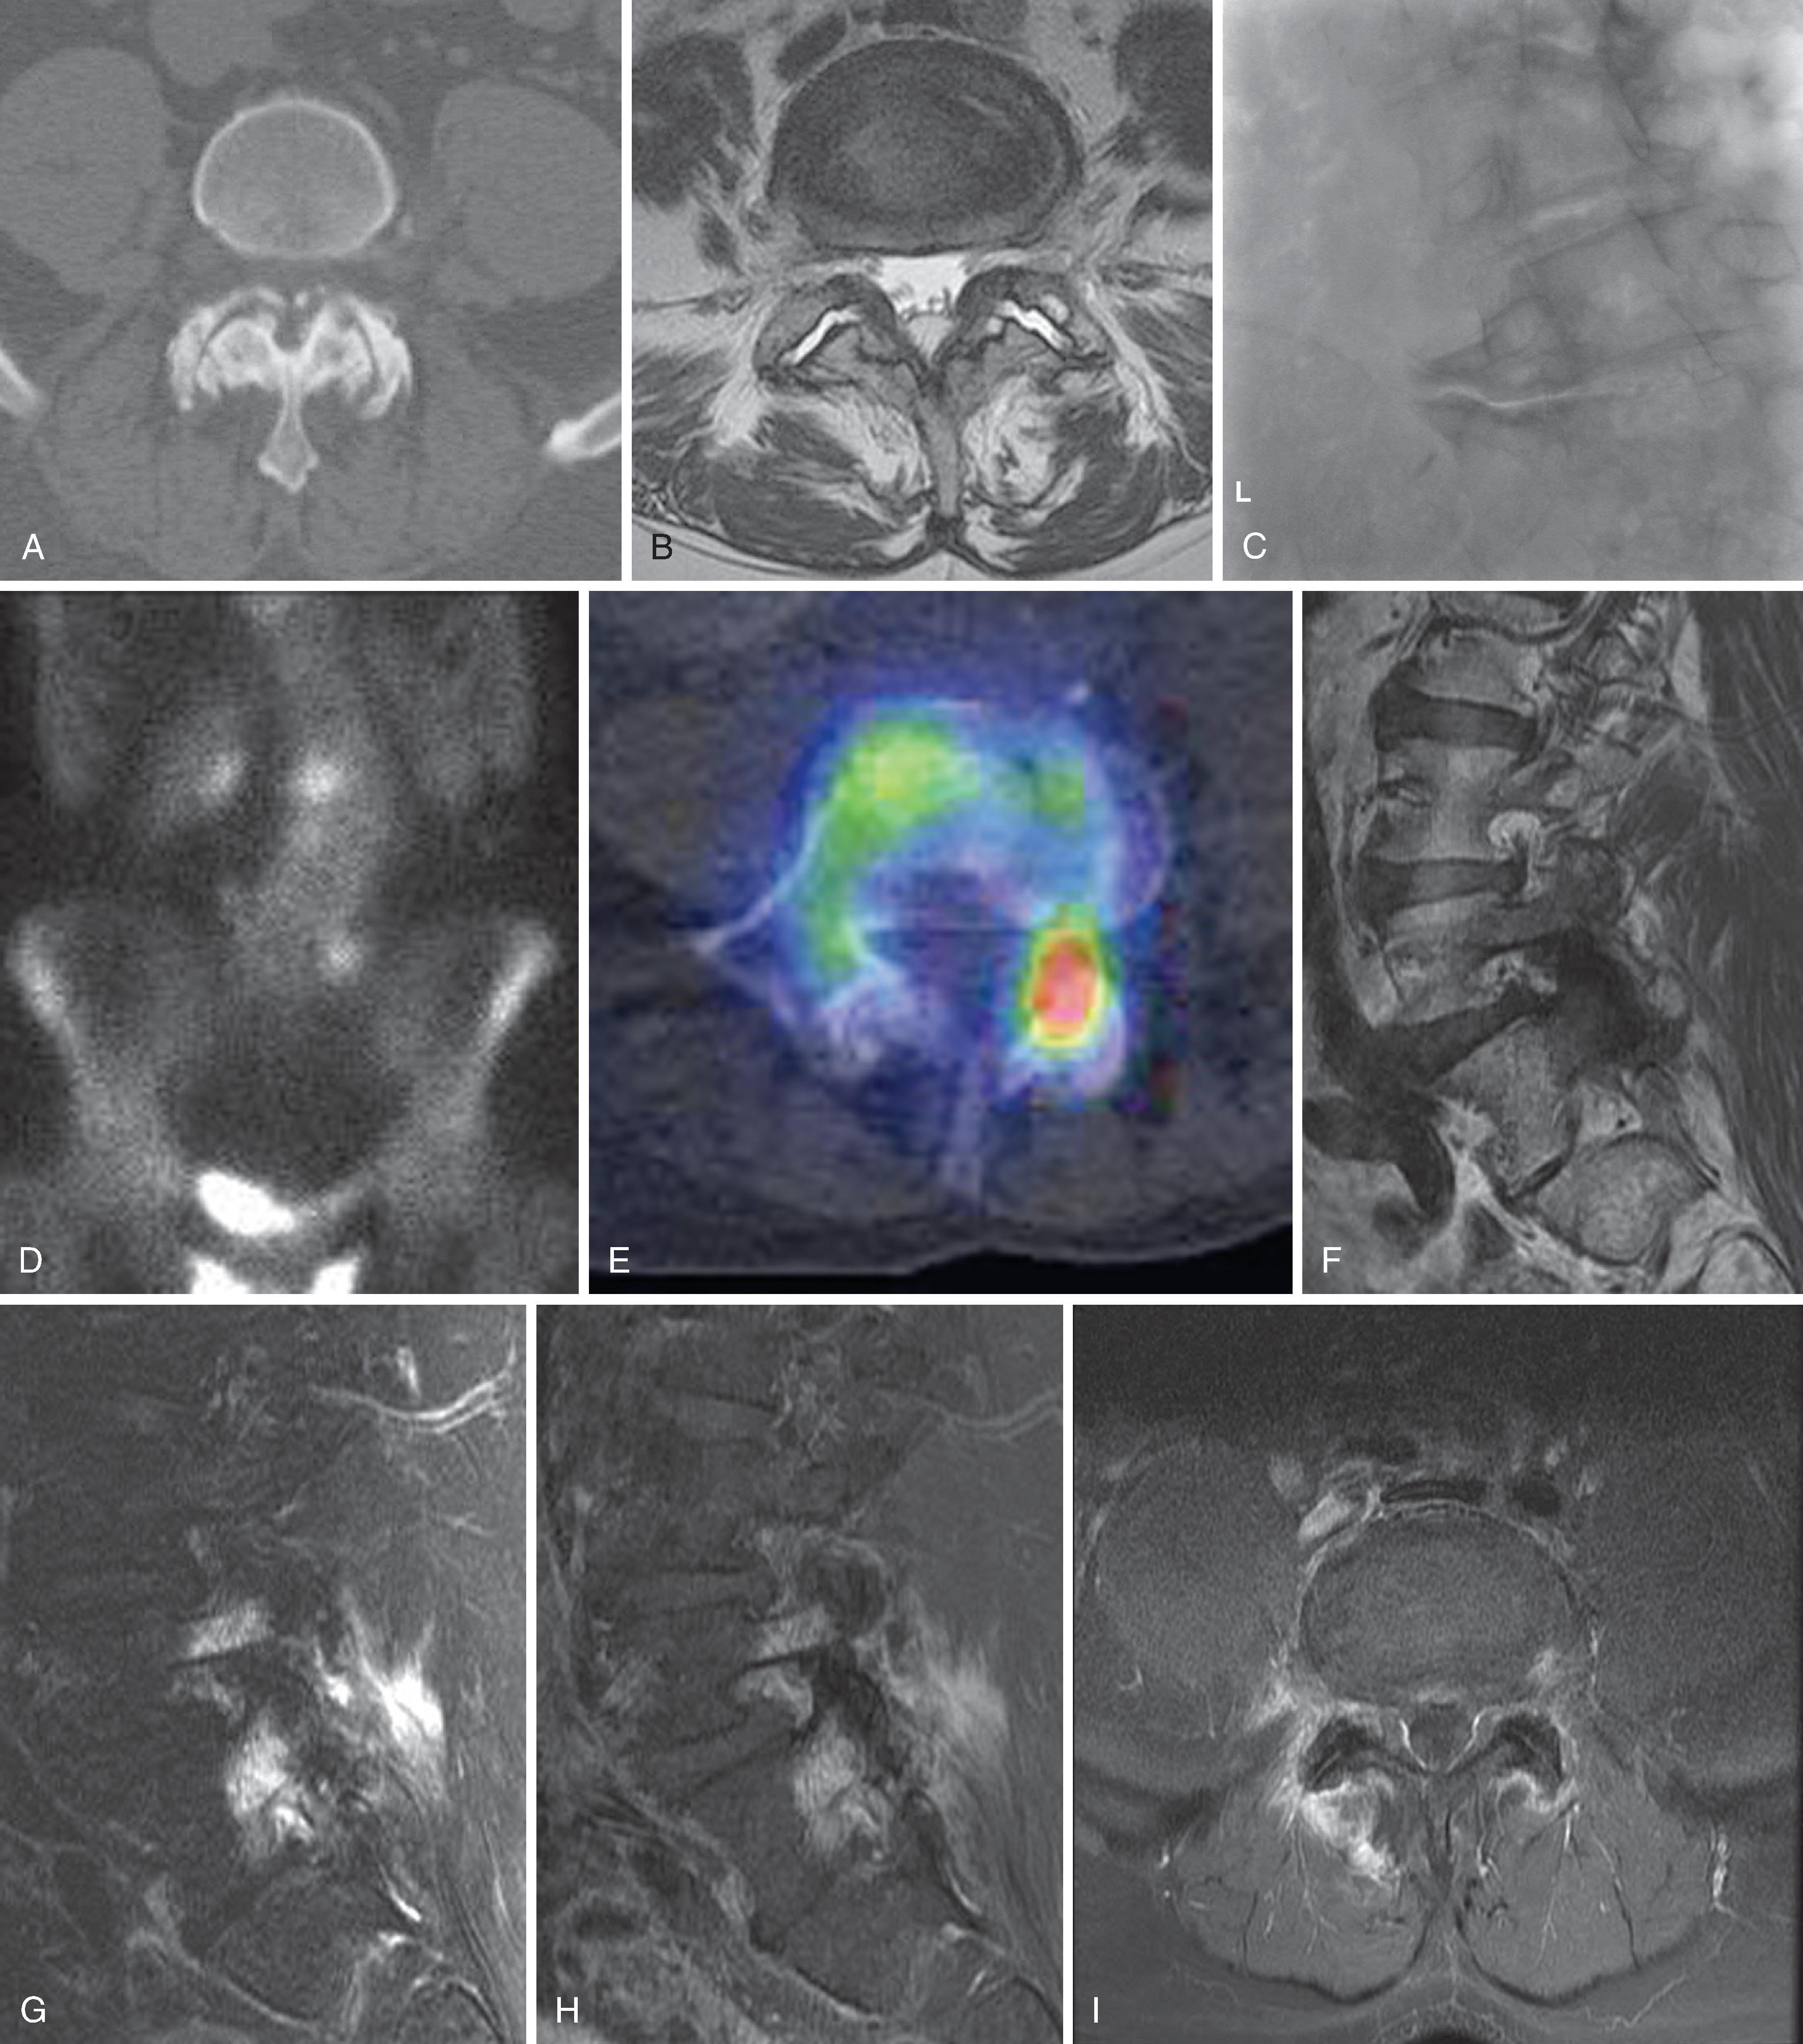 Figure 20.10, Imaging of facet arthrosis and synovitis. The changes of arthrosis (i.e. joint space narrowing, osteophytes, subchondral cysts, or sclerosis) as seen in the CT image (A) , the T2 MRI image (B) , or the radiographic image (C) do not correlate with pain. Planar bone scan image (D) of the same patient as (C) shows increased uptake near the lumbosacral junction on the left in this patient with left-sided axial pain. SPECT/CT image (E) provides better anatomic localization to the left L4–5 facet. In another patient with right-sided axial lumbar pain, T1 MRI image (F) shows a low signal in the right L5 pedicle and the right L4–5 facet. Fat-saturated T2 sagittal image (G) demonstrates T2 hyperintensity in L4 and L5 pedicles, L4–5 facet, and adjacent soft tissues. Enhanced T1 sagittal (H) and axial (I) images also demonstrate the extensive inflammatory response in this patient with active synovitis. T2 hyperintensity or enhancement in pedicles can occur in facet synovitis or stress fractures of the pars or pedicle. CT , Computed tomography; MRI , magnetic resonance image; SPECT , single-photon emission computed tomography.